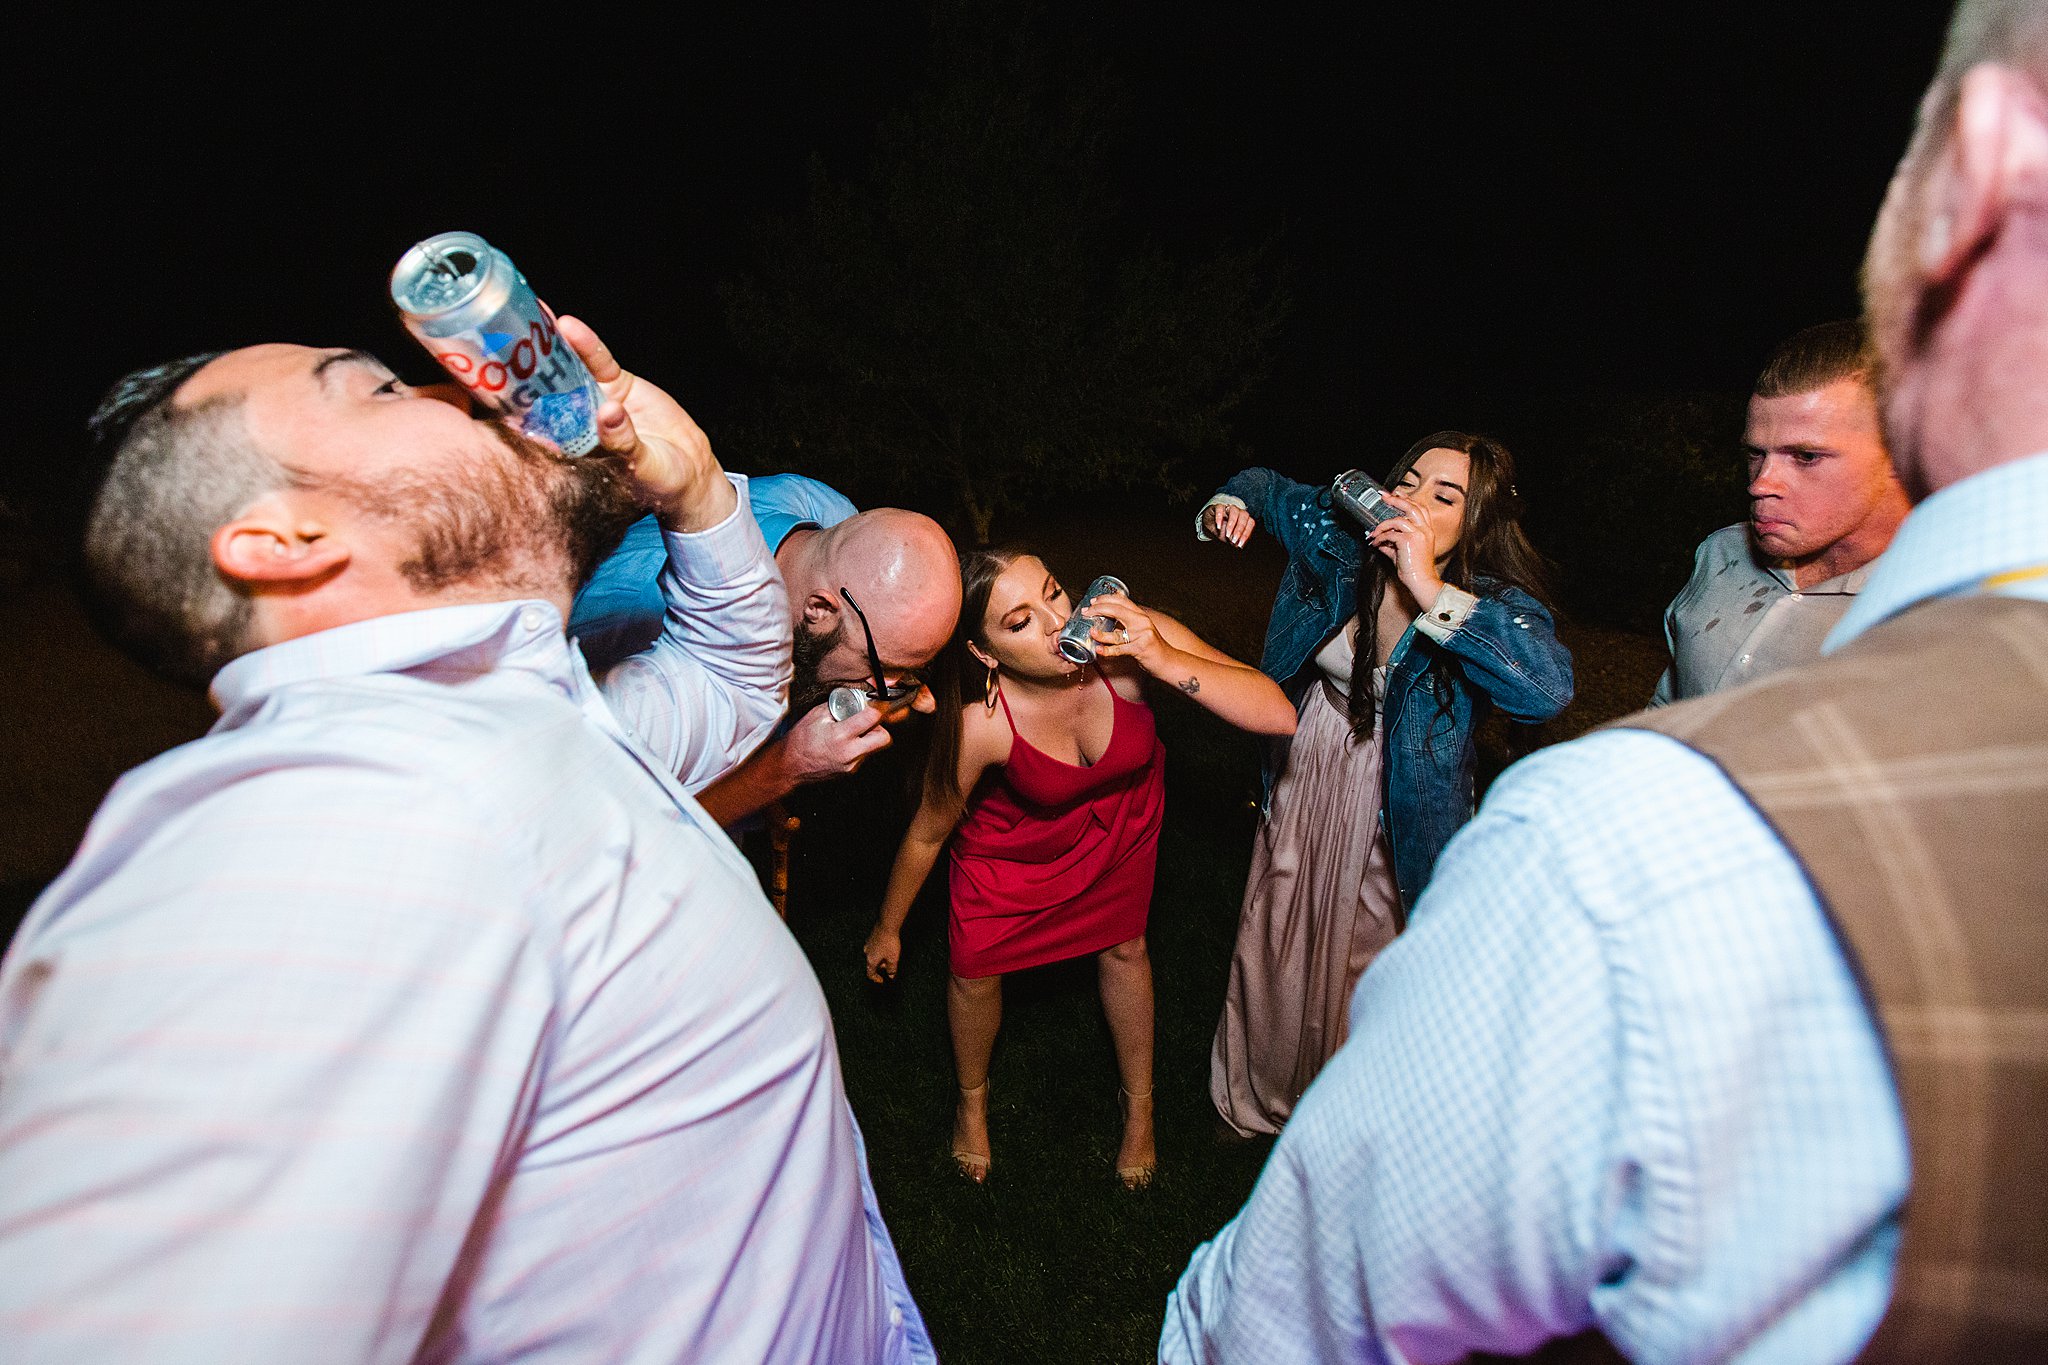 Guests shotgunning beers at a Van Dickson Ranch wedding by PMA Photography.